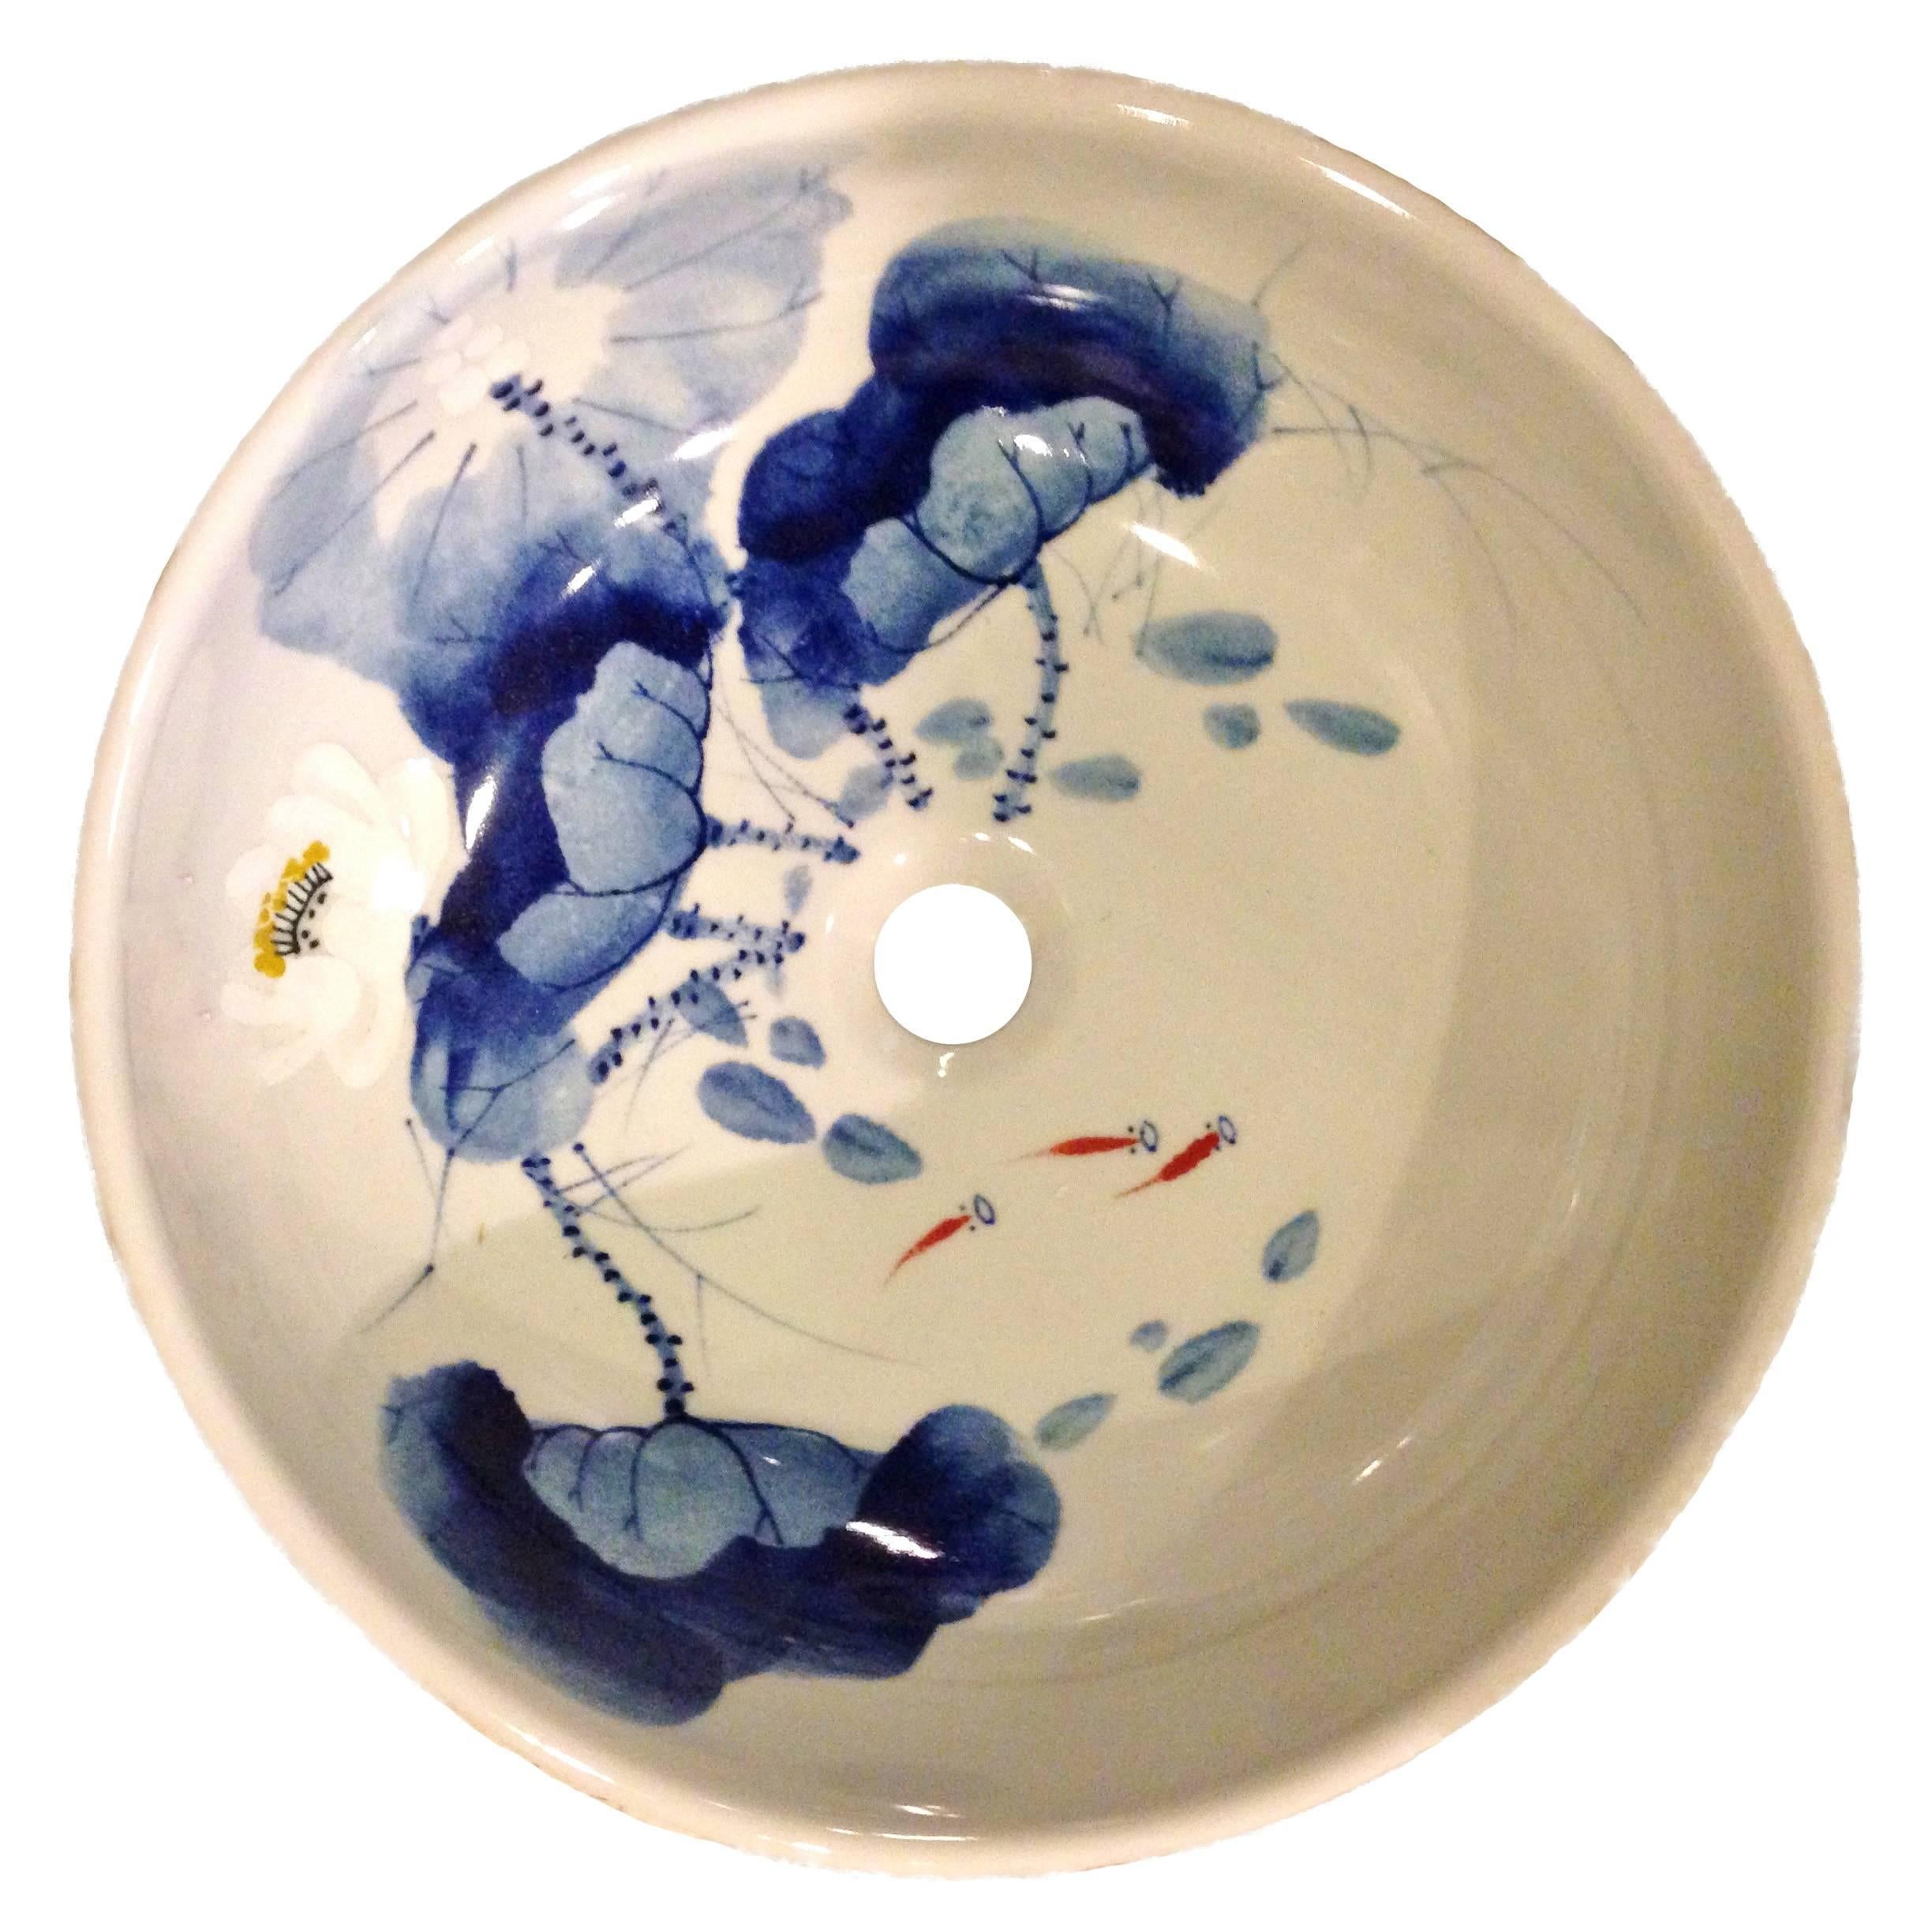 This pair of beautiful sinks are the only pair that we have. Completely hand-painted, the bowls depict groups of fish swimming amid lotuses. The use of inky blue is a Classic Chinese watercolor approach. Details such as folds of the leaves, shrimps,